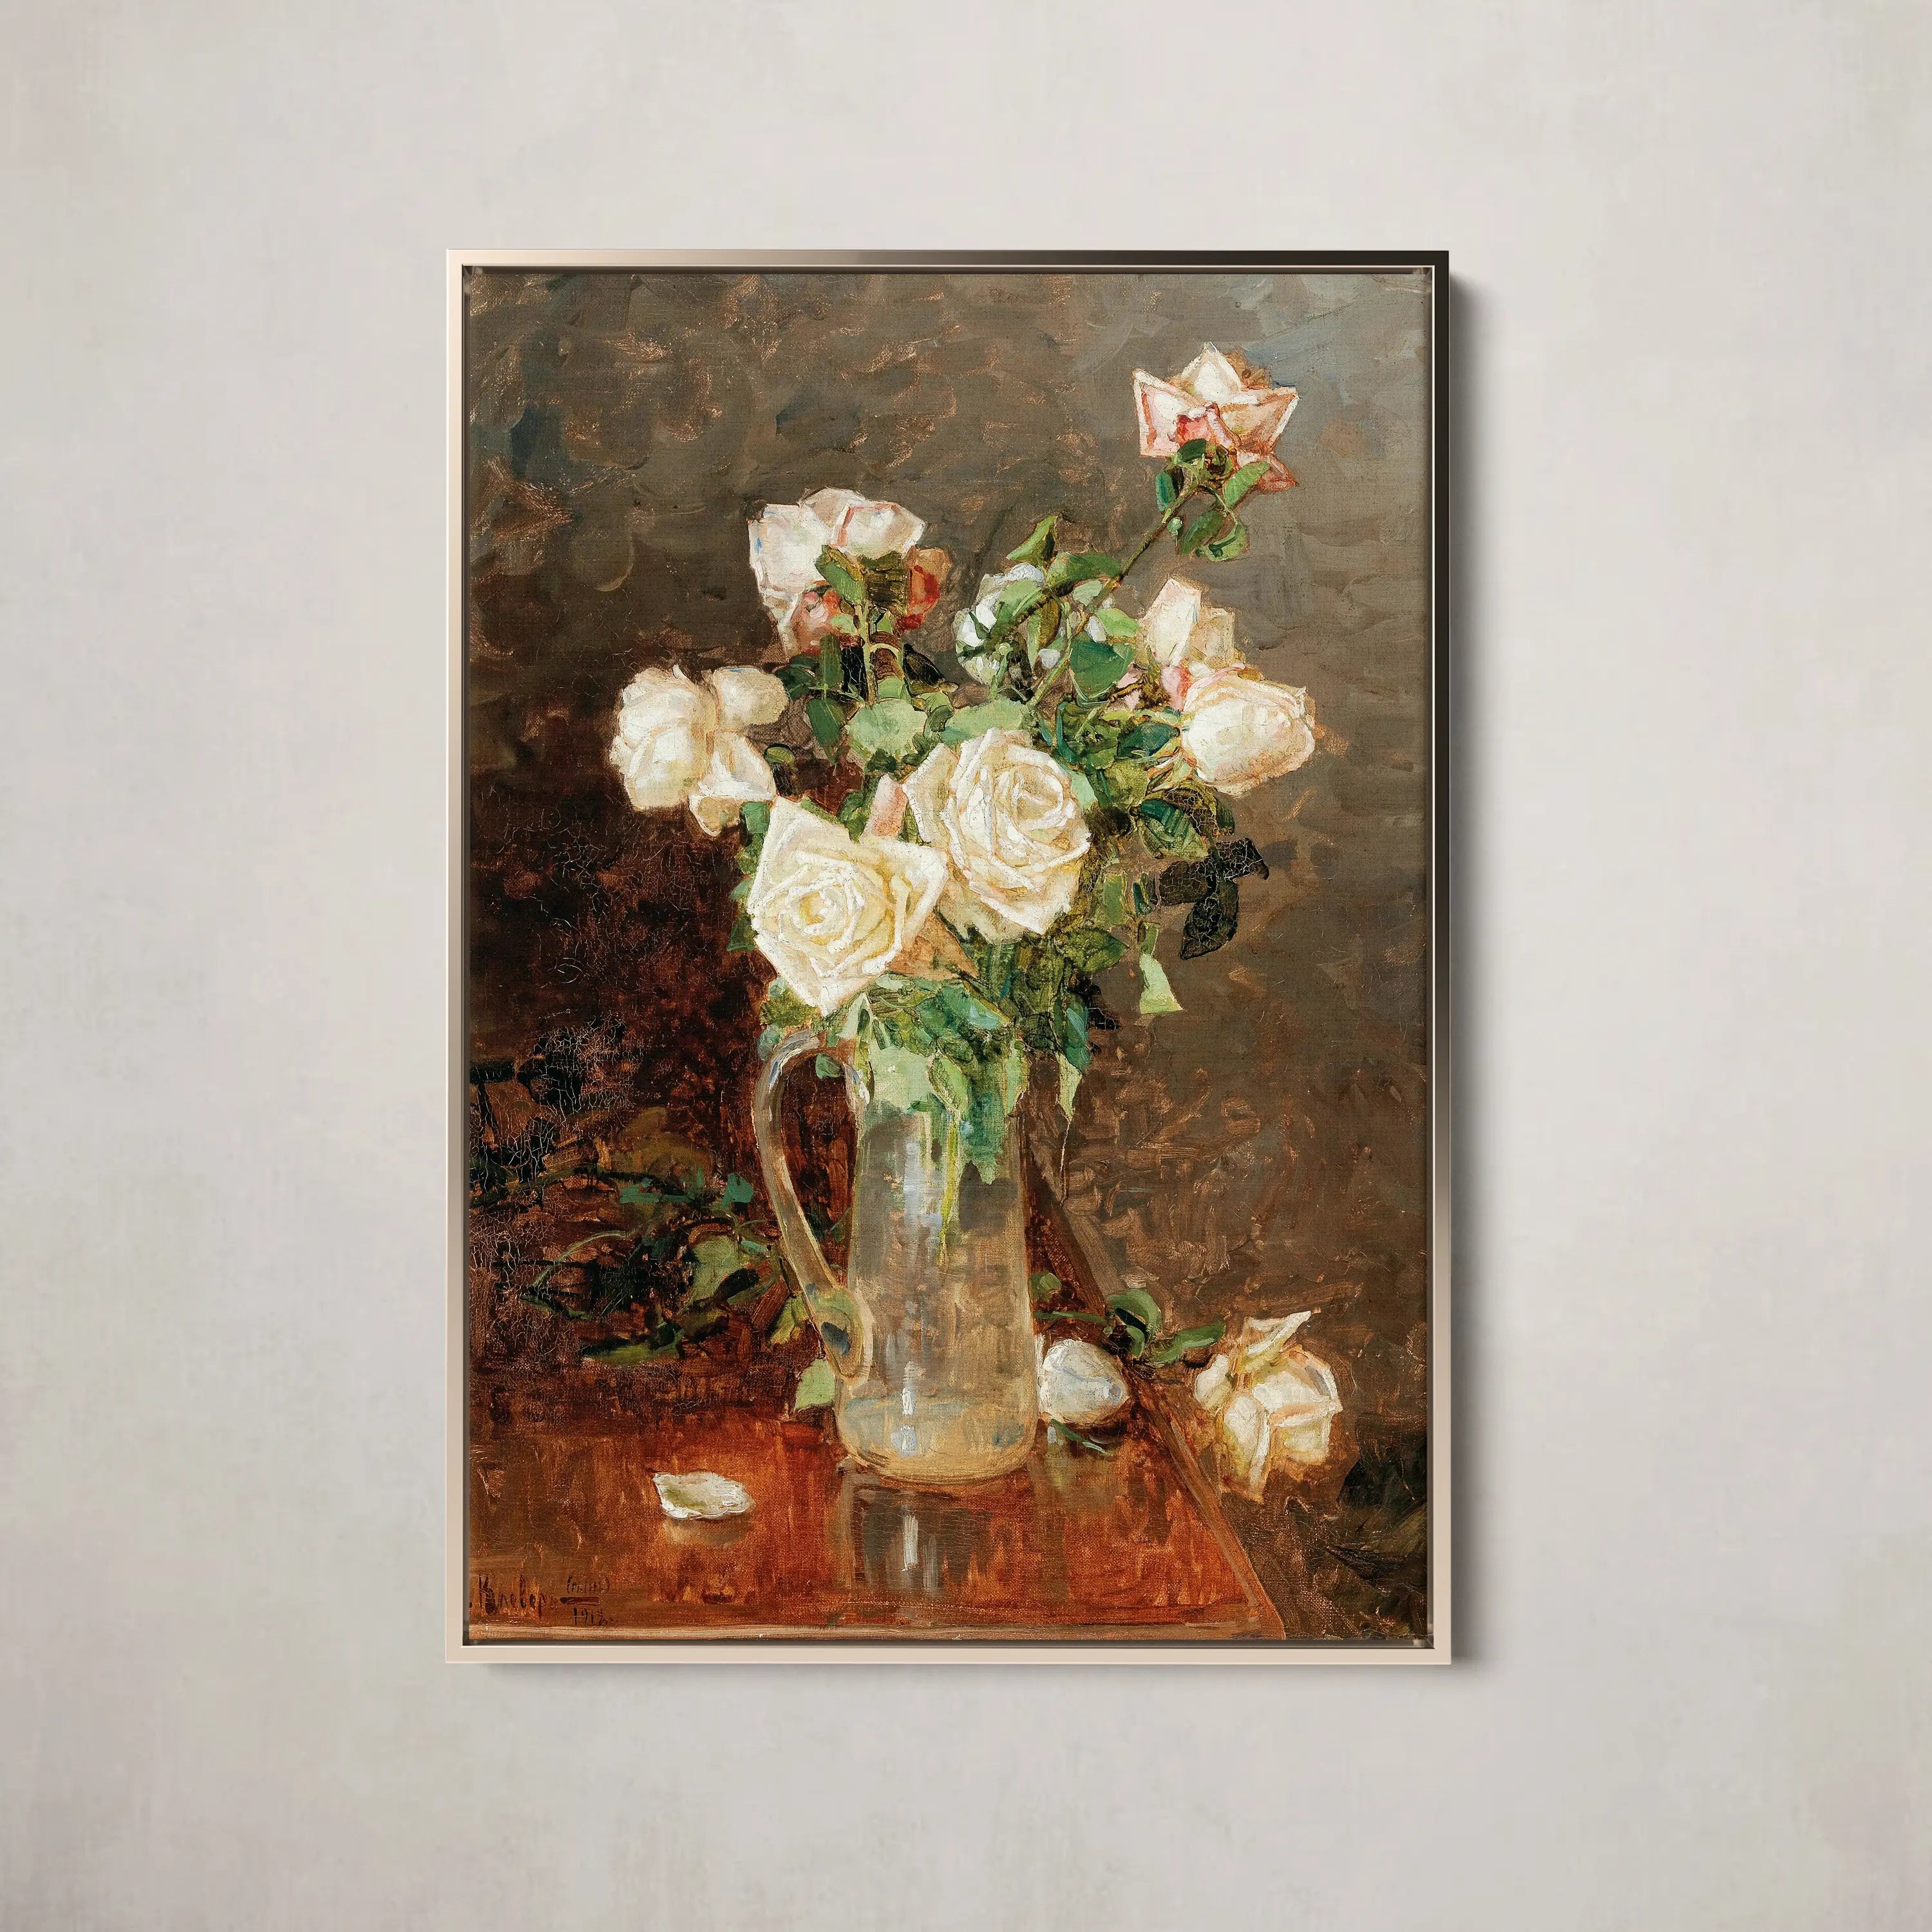 A bouquet of roses in a glass ewer (1912) by Yuliy Yulevich Klever the Younger